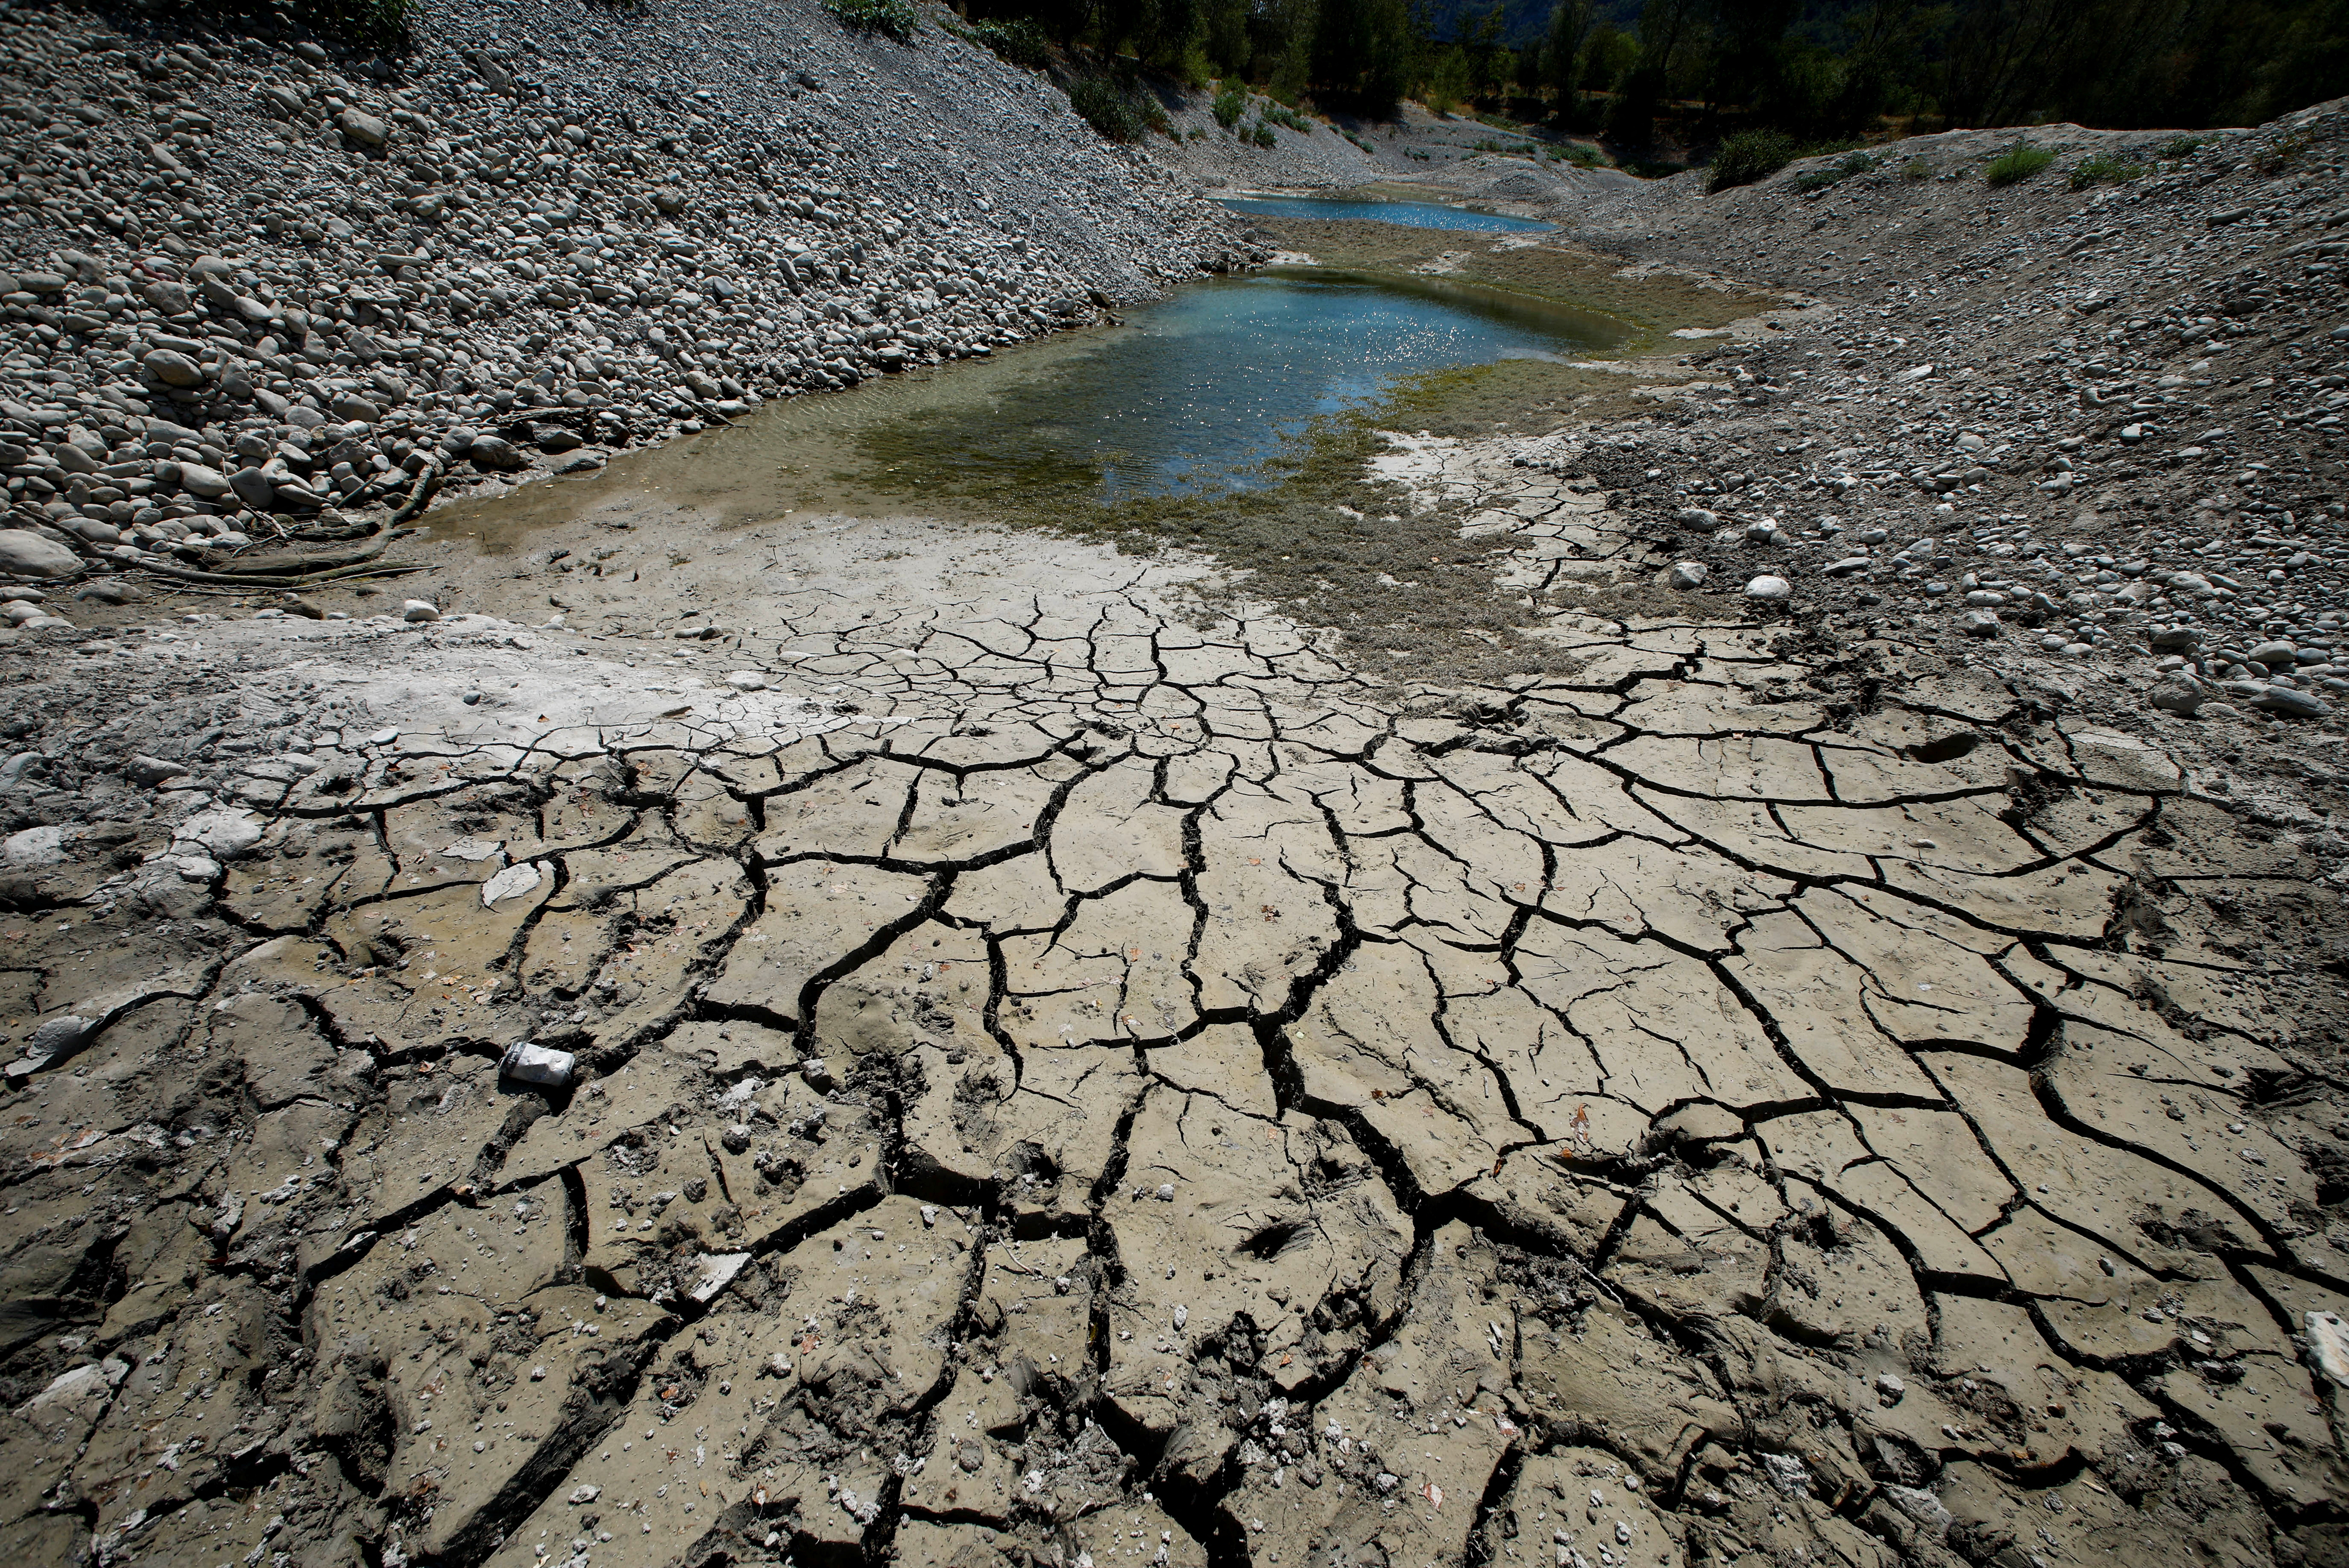 Cracked and dry earth is seen on the banks of Le Broc lake